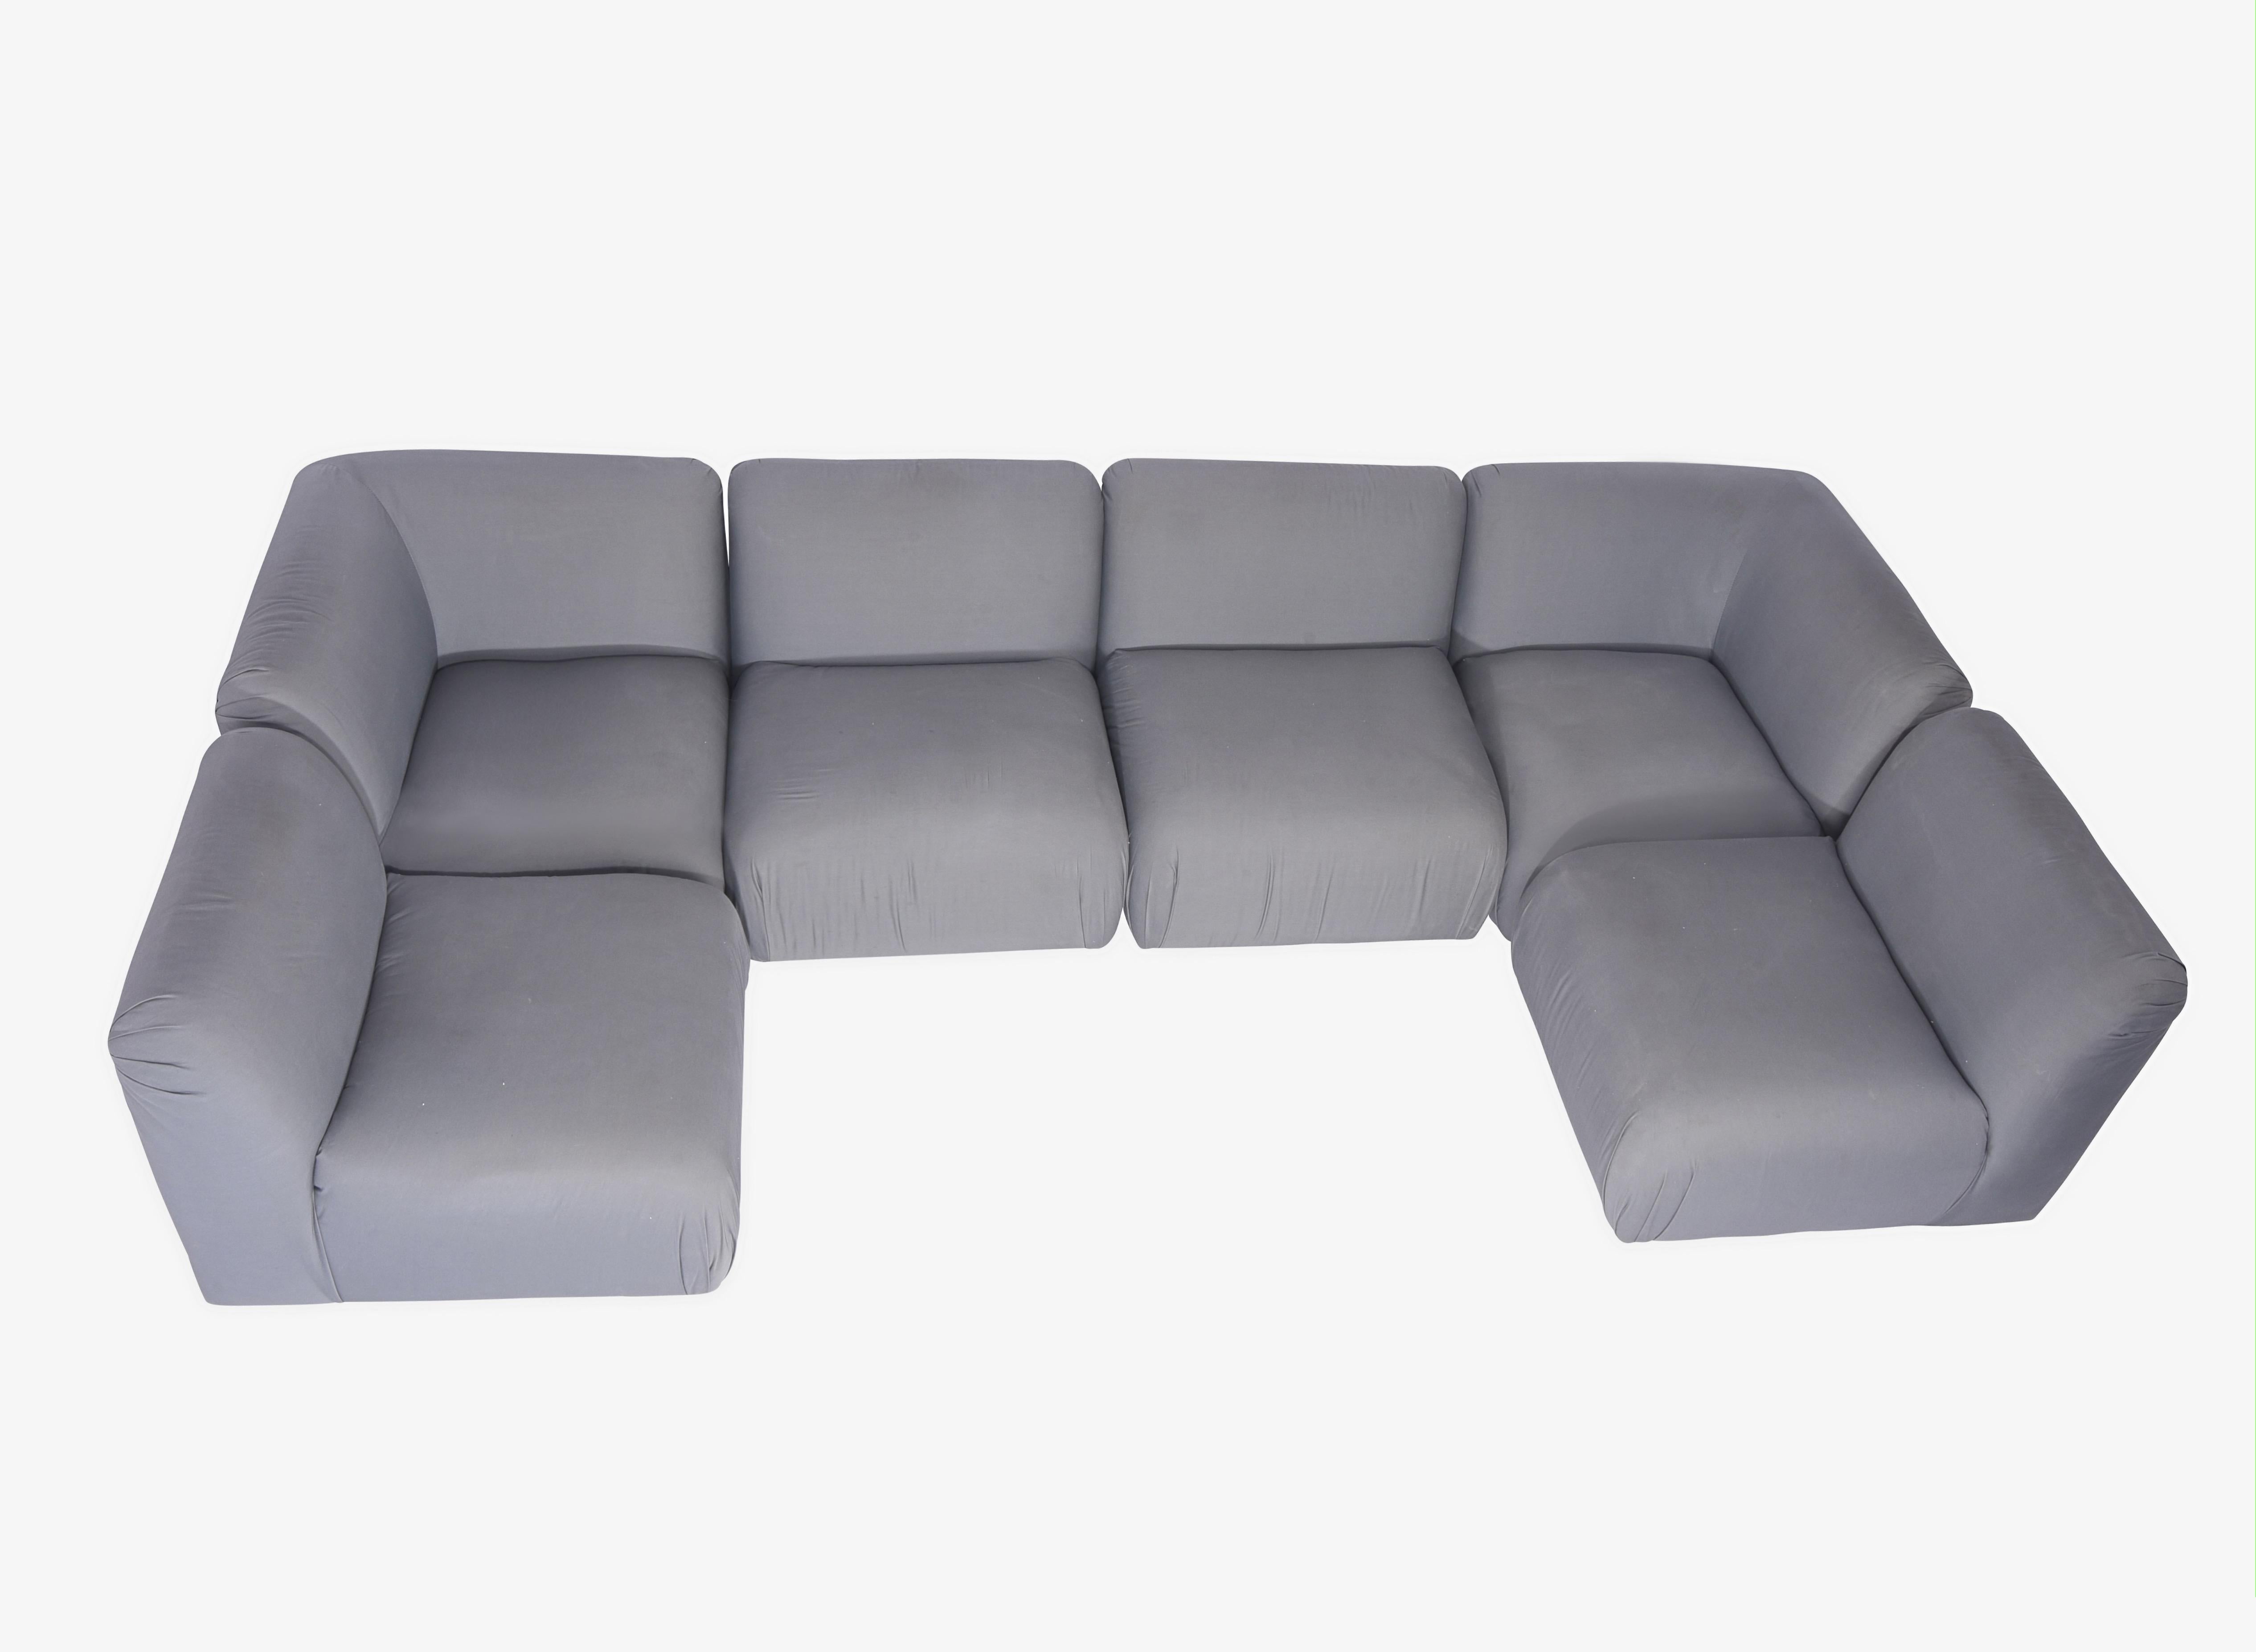 6-piece sectional sofa by Milo Baughman for Thayer-Coggin. Re-upholstery recommended.

Each section is 32